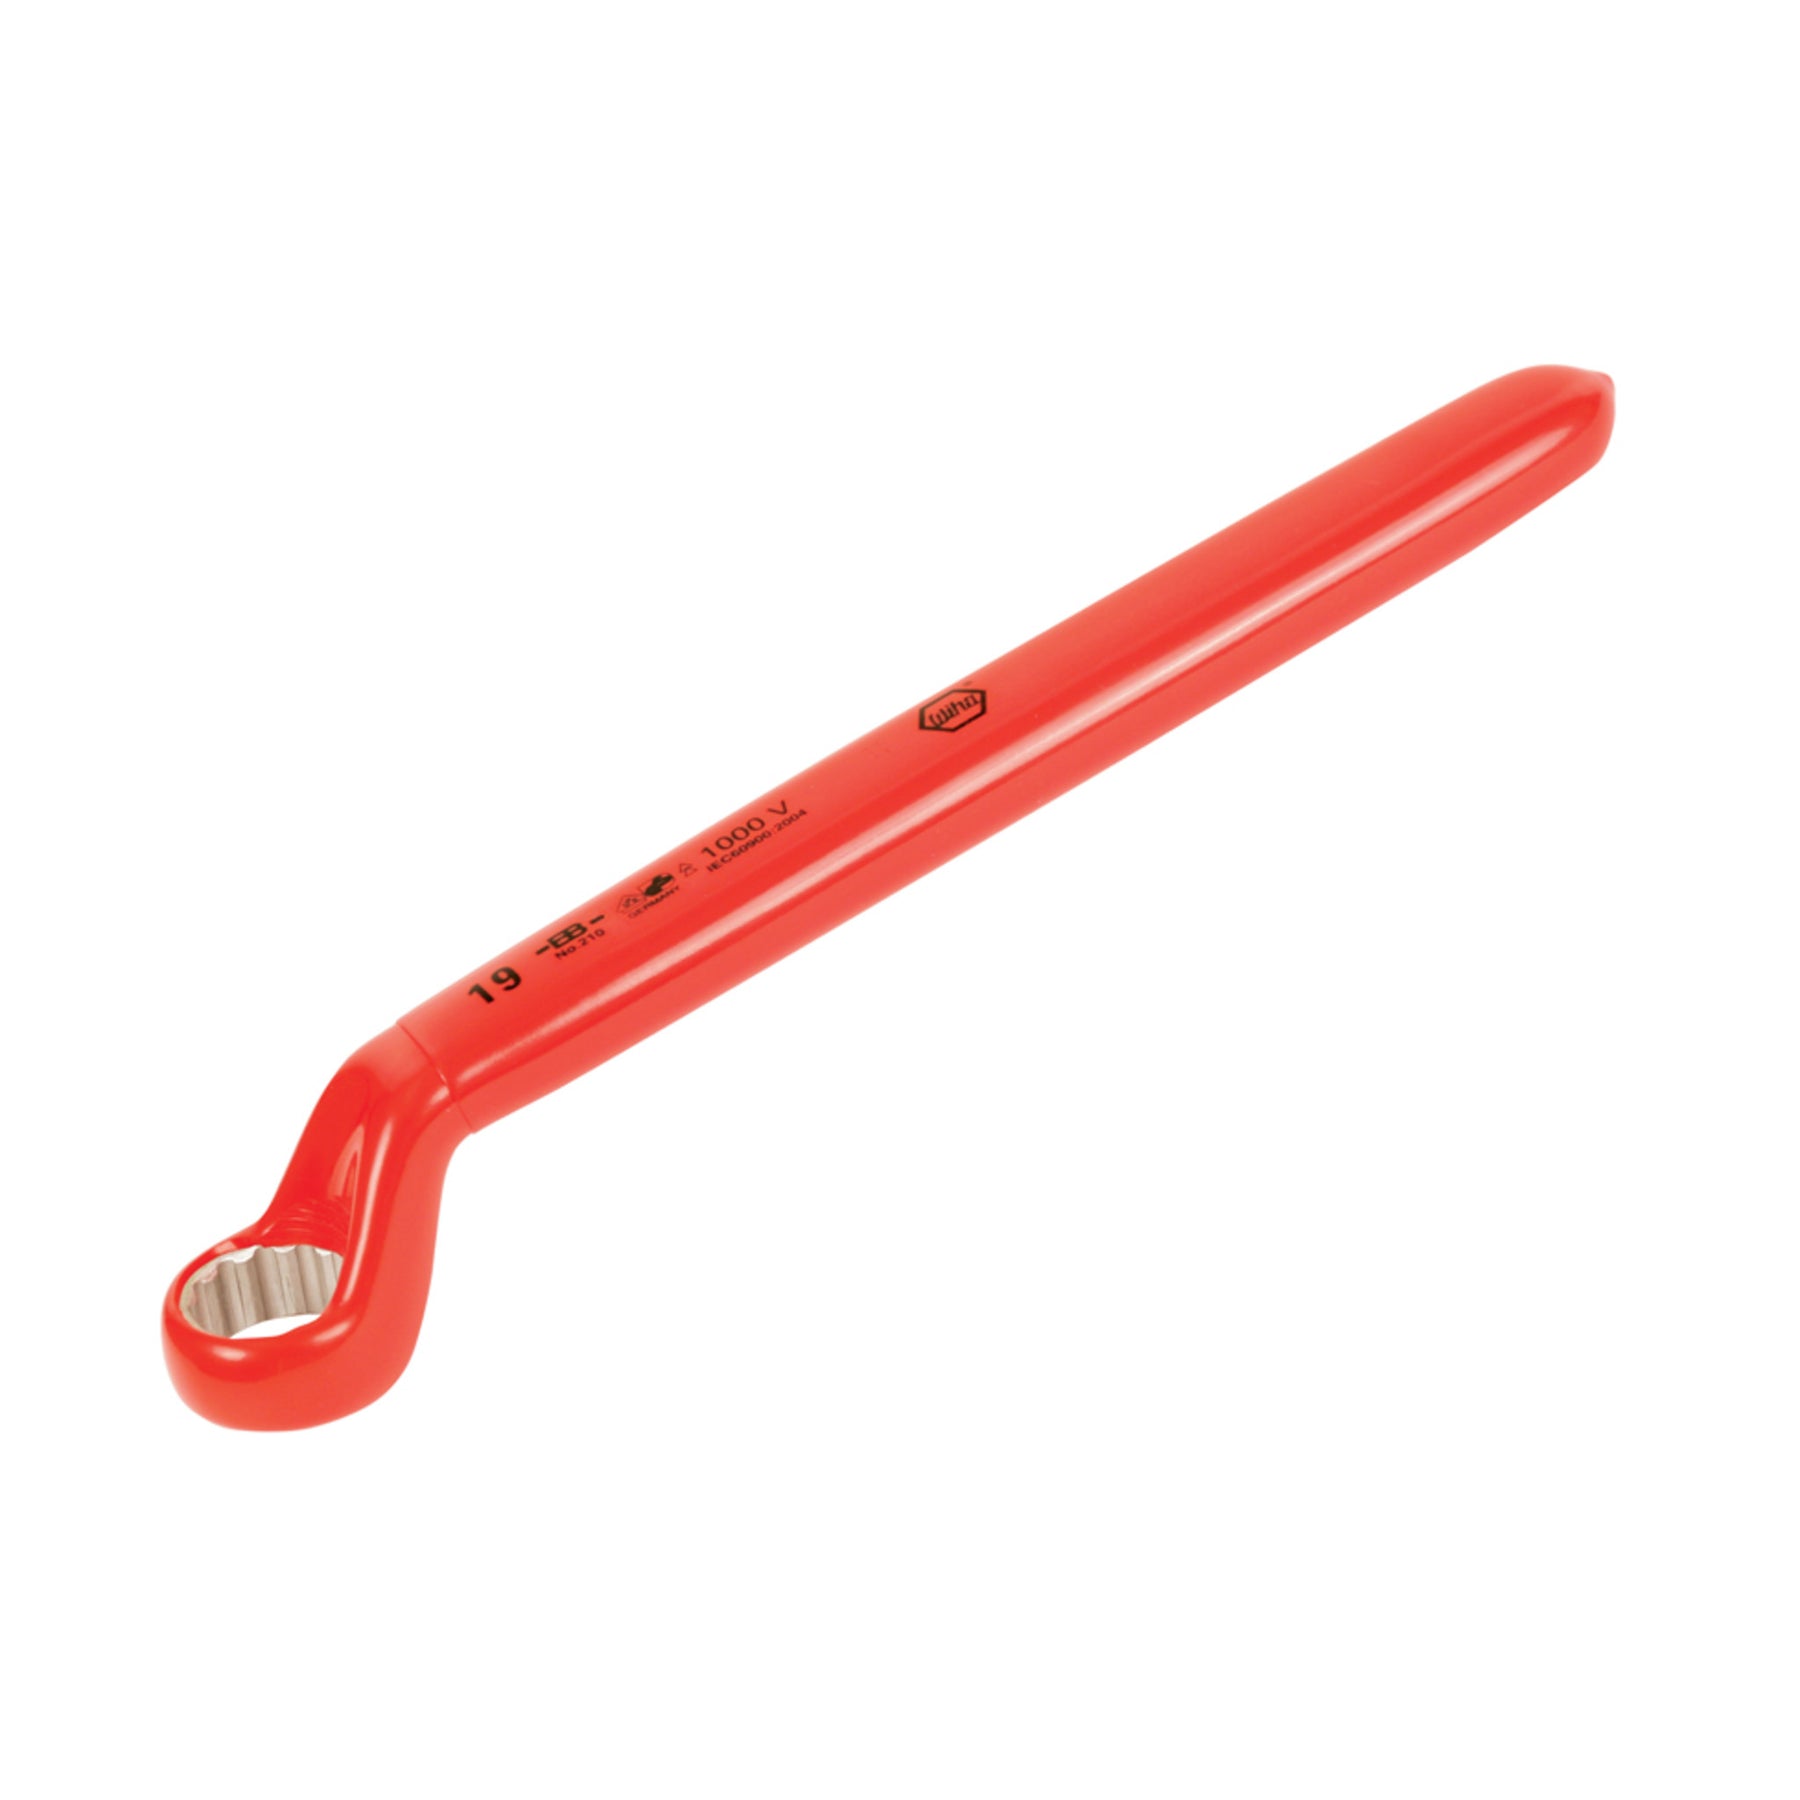 Insulated Deep Offset Wrench 1-1/16"